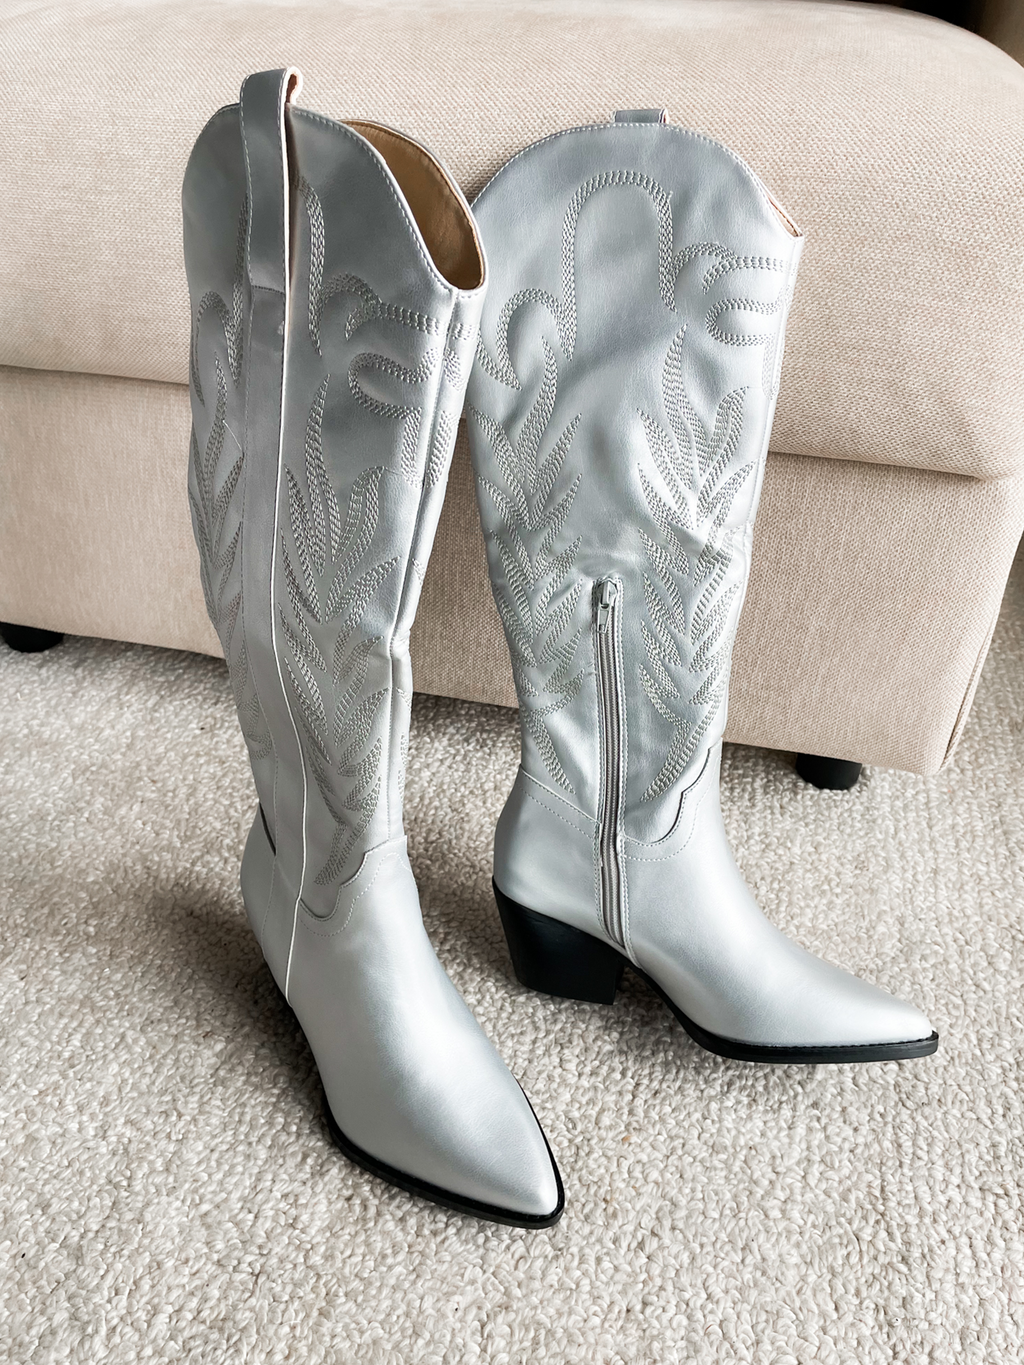 Samara Cowgirl Boot in Silver - Stitch And Feather